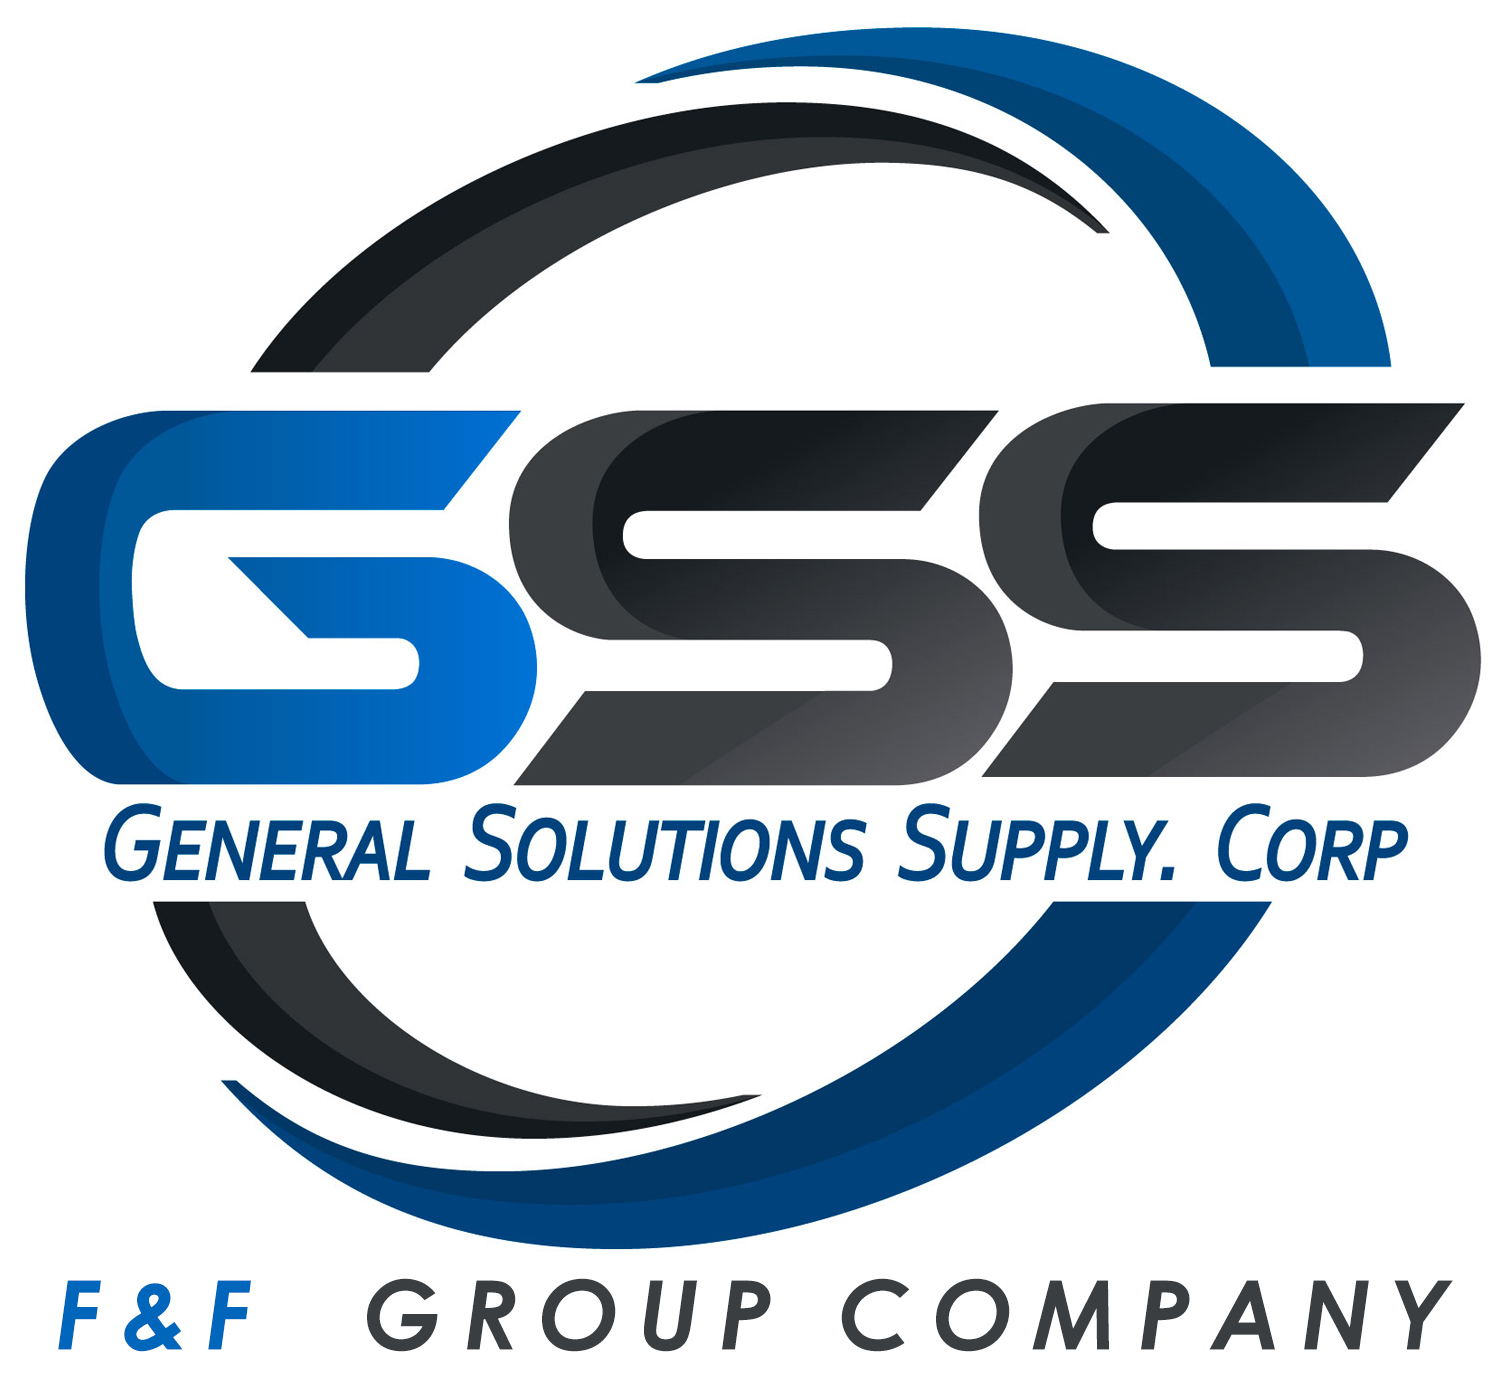 General Solutions Supply Corp.